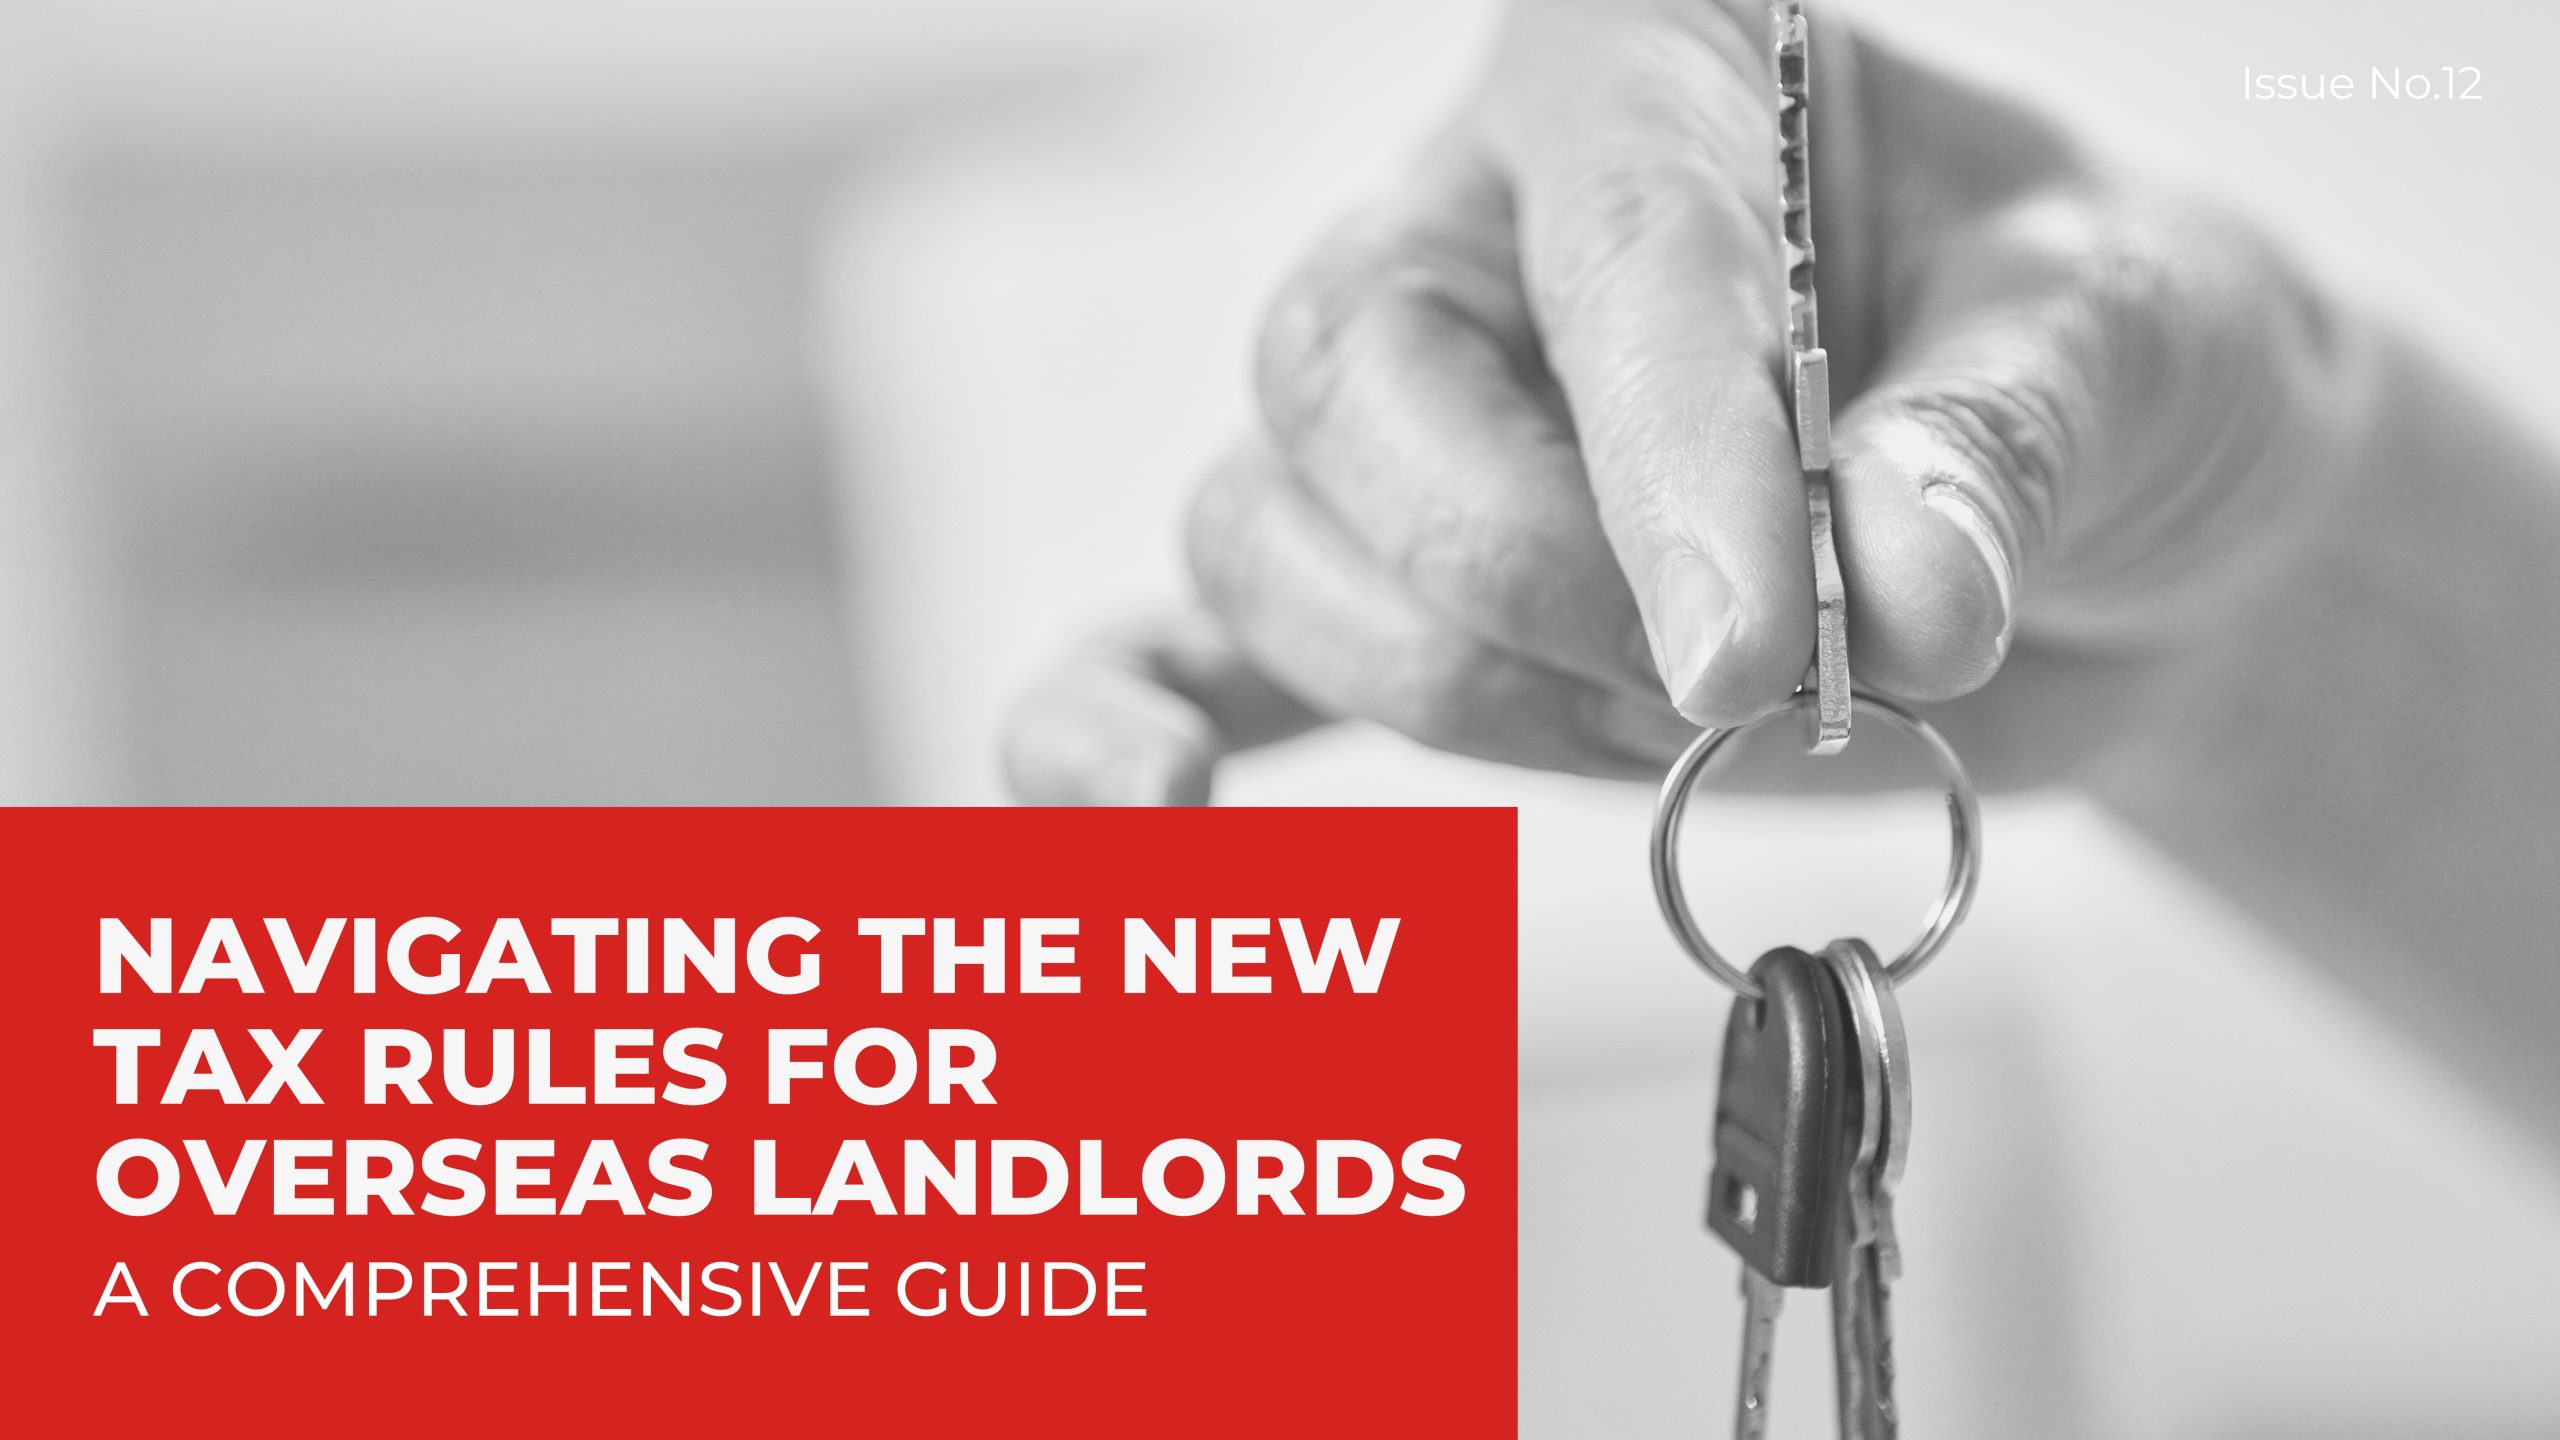 You are currently viewing NAVIGATING THE NEW TAX RULES FOR OVERSEAS LANDLORDS: A COMPREHENSIVE GUIDE